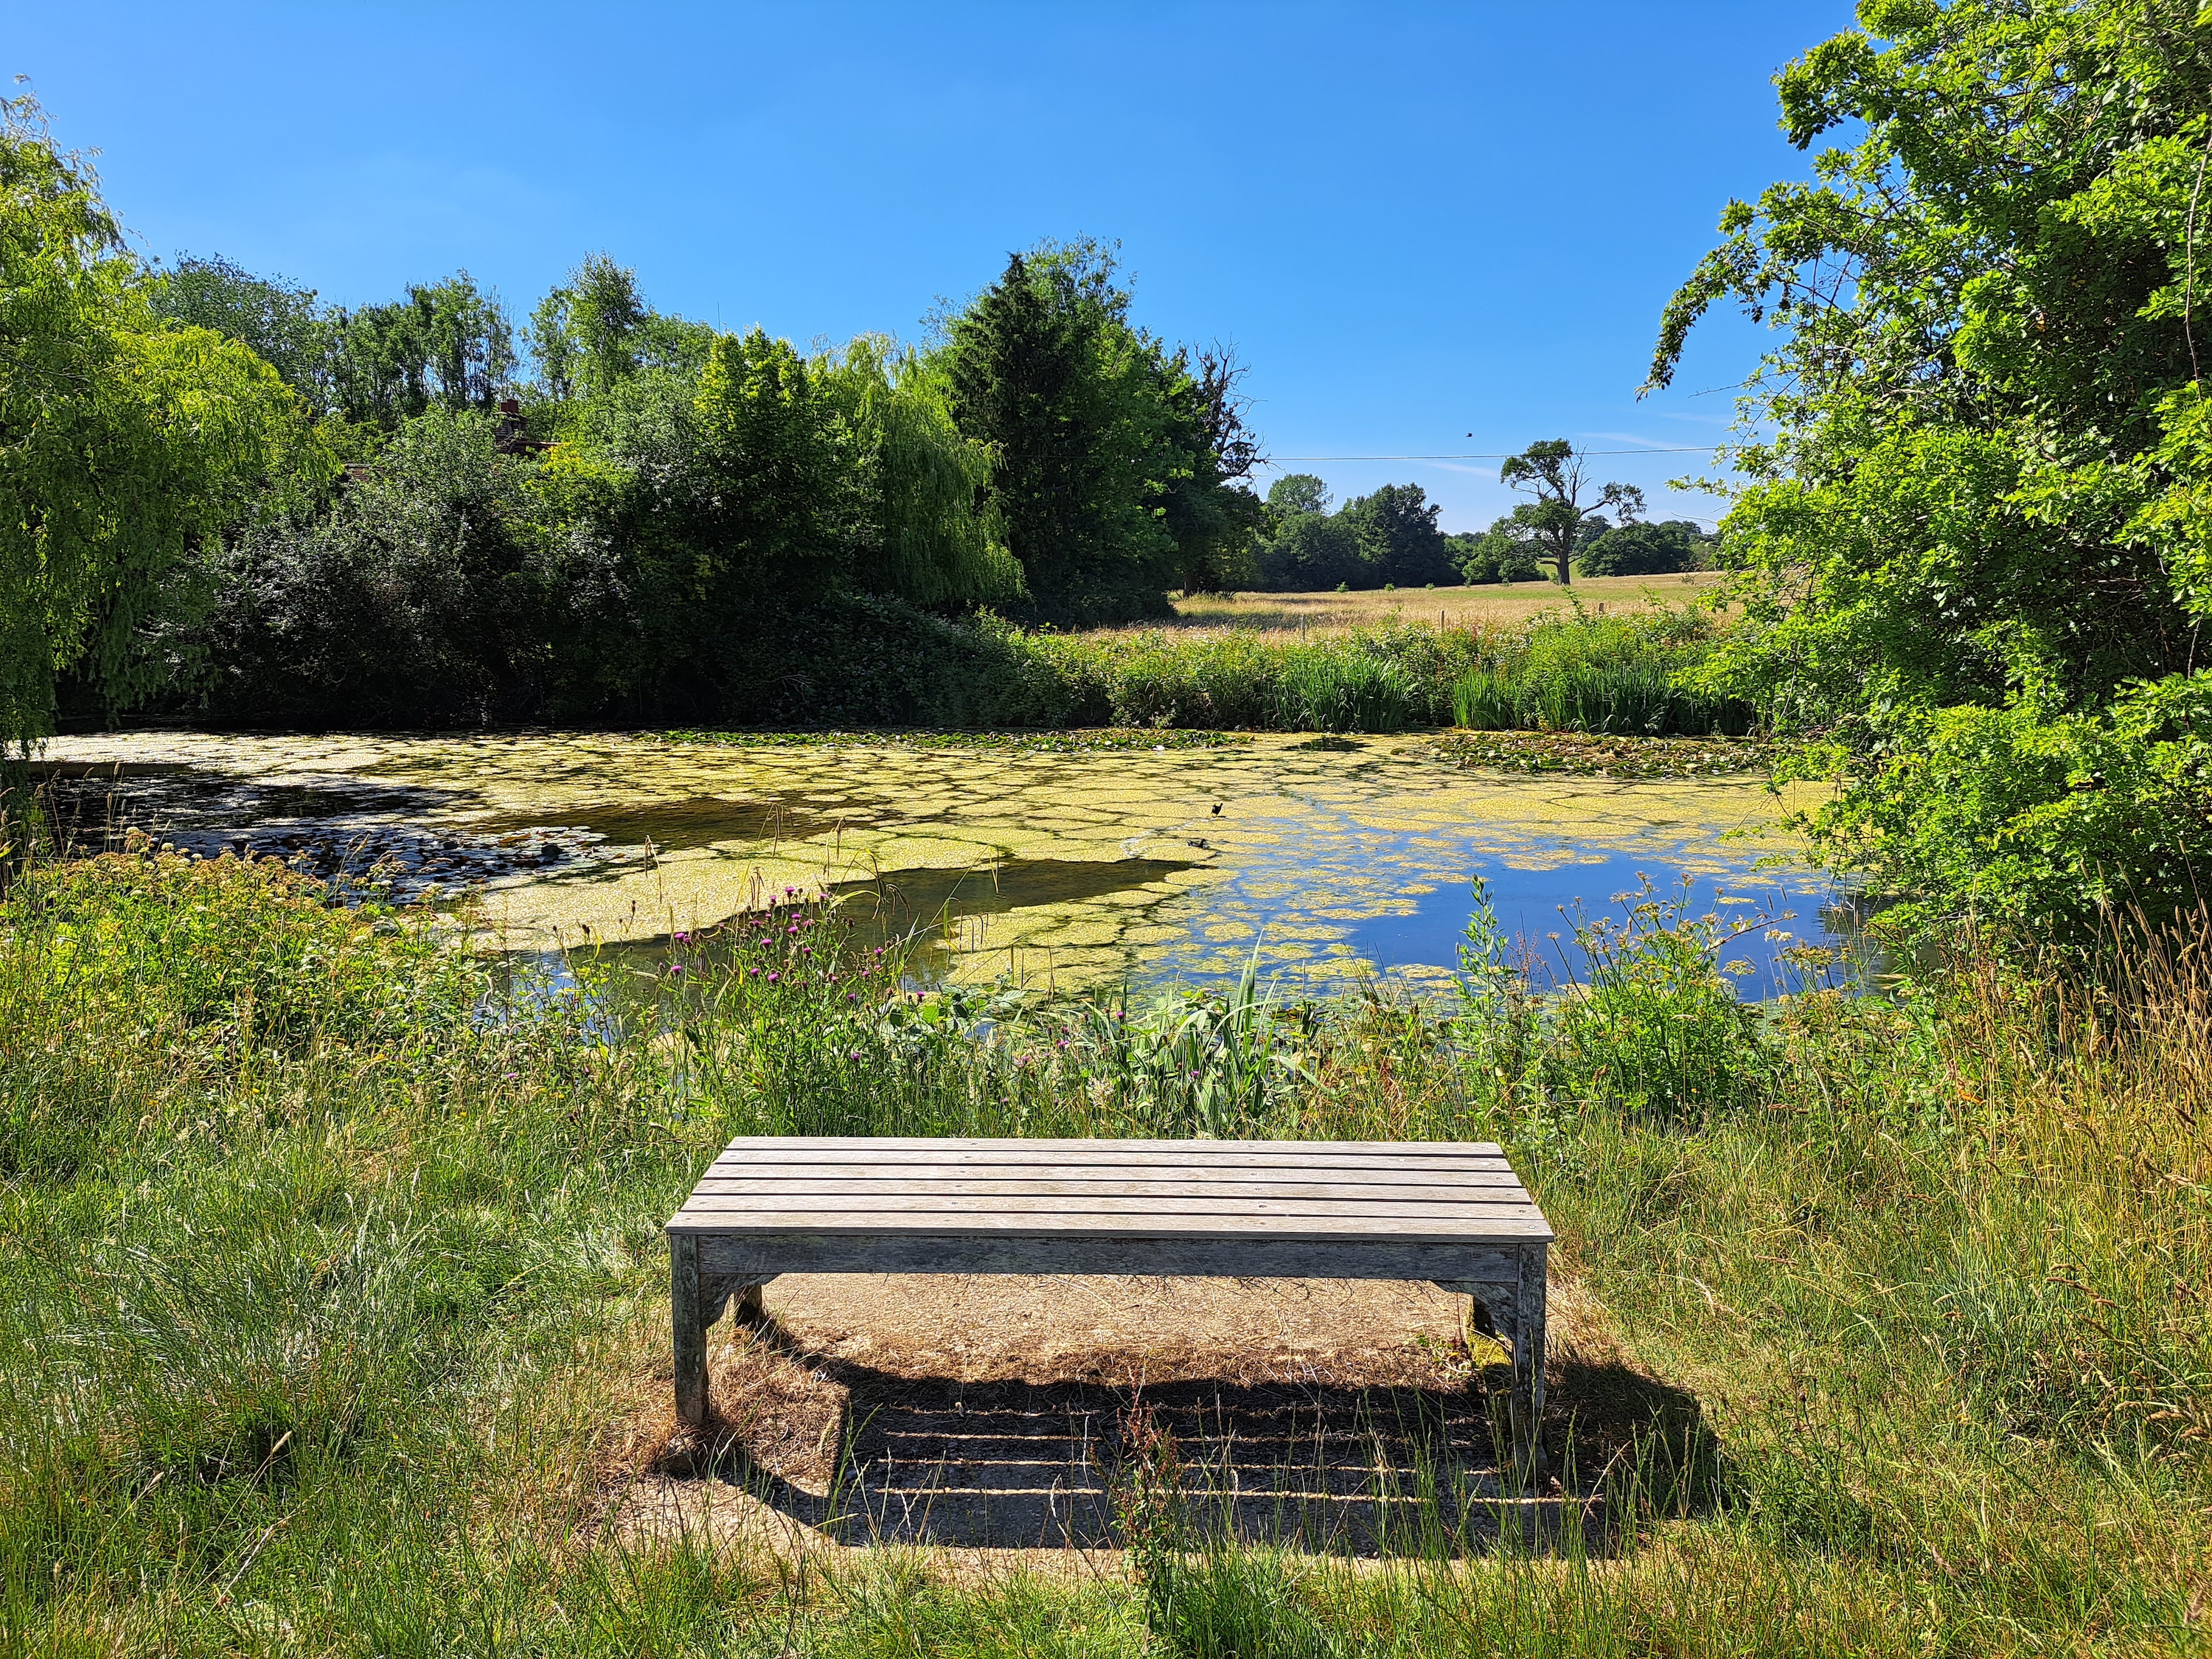 Photo of a bench and pond taken with the Samsung Galaxy A53 5G.